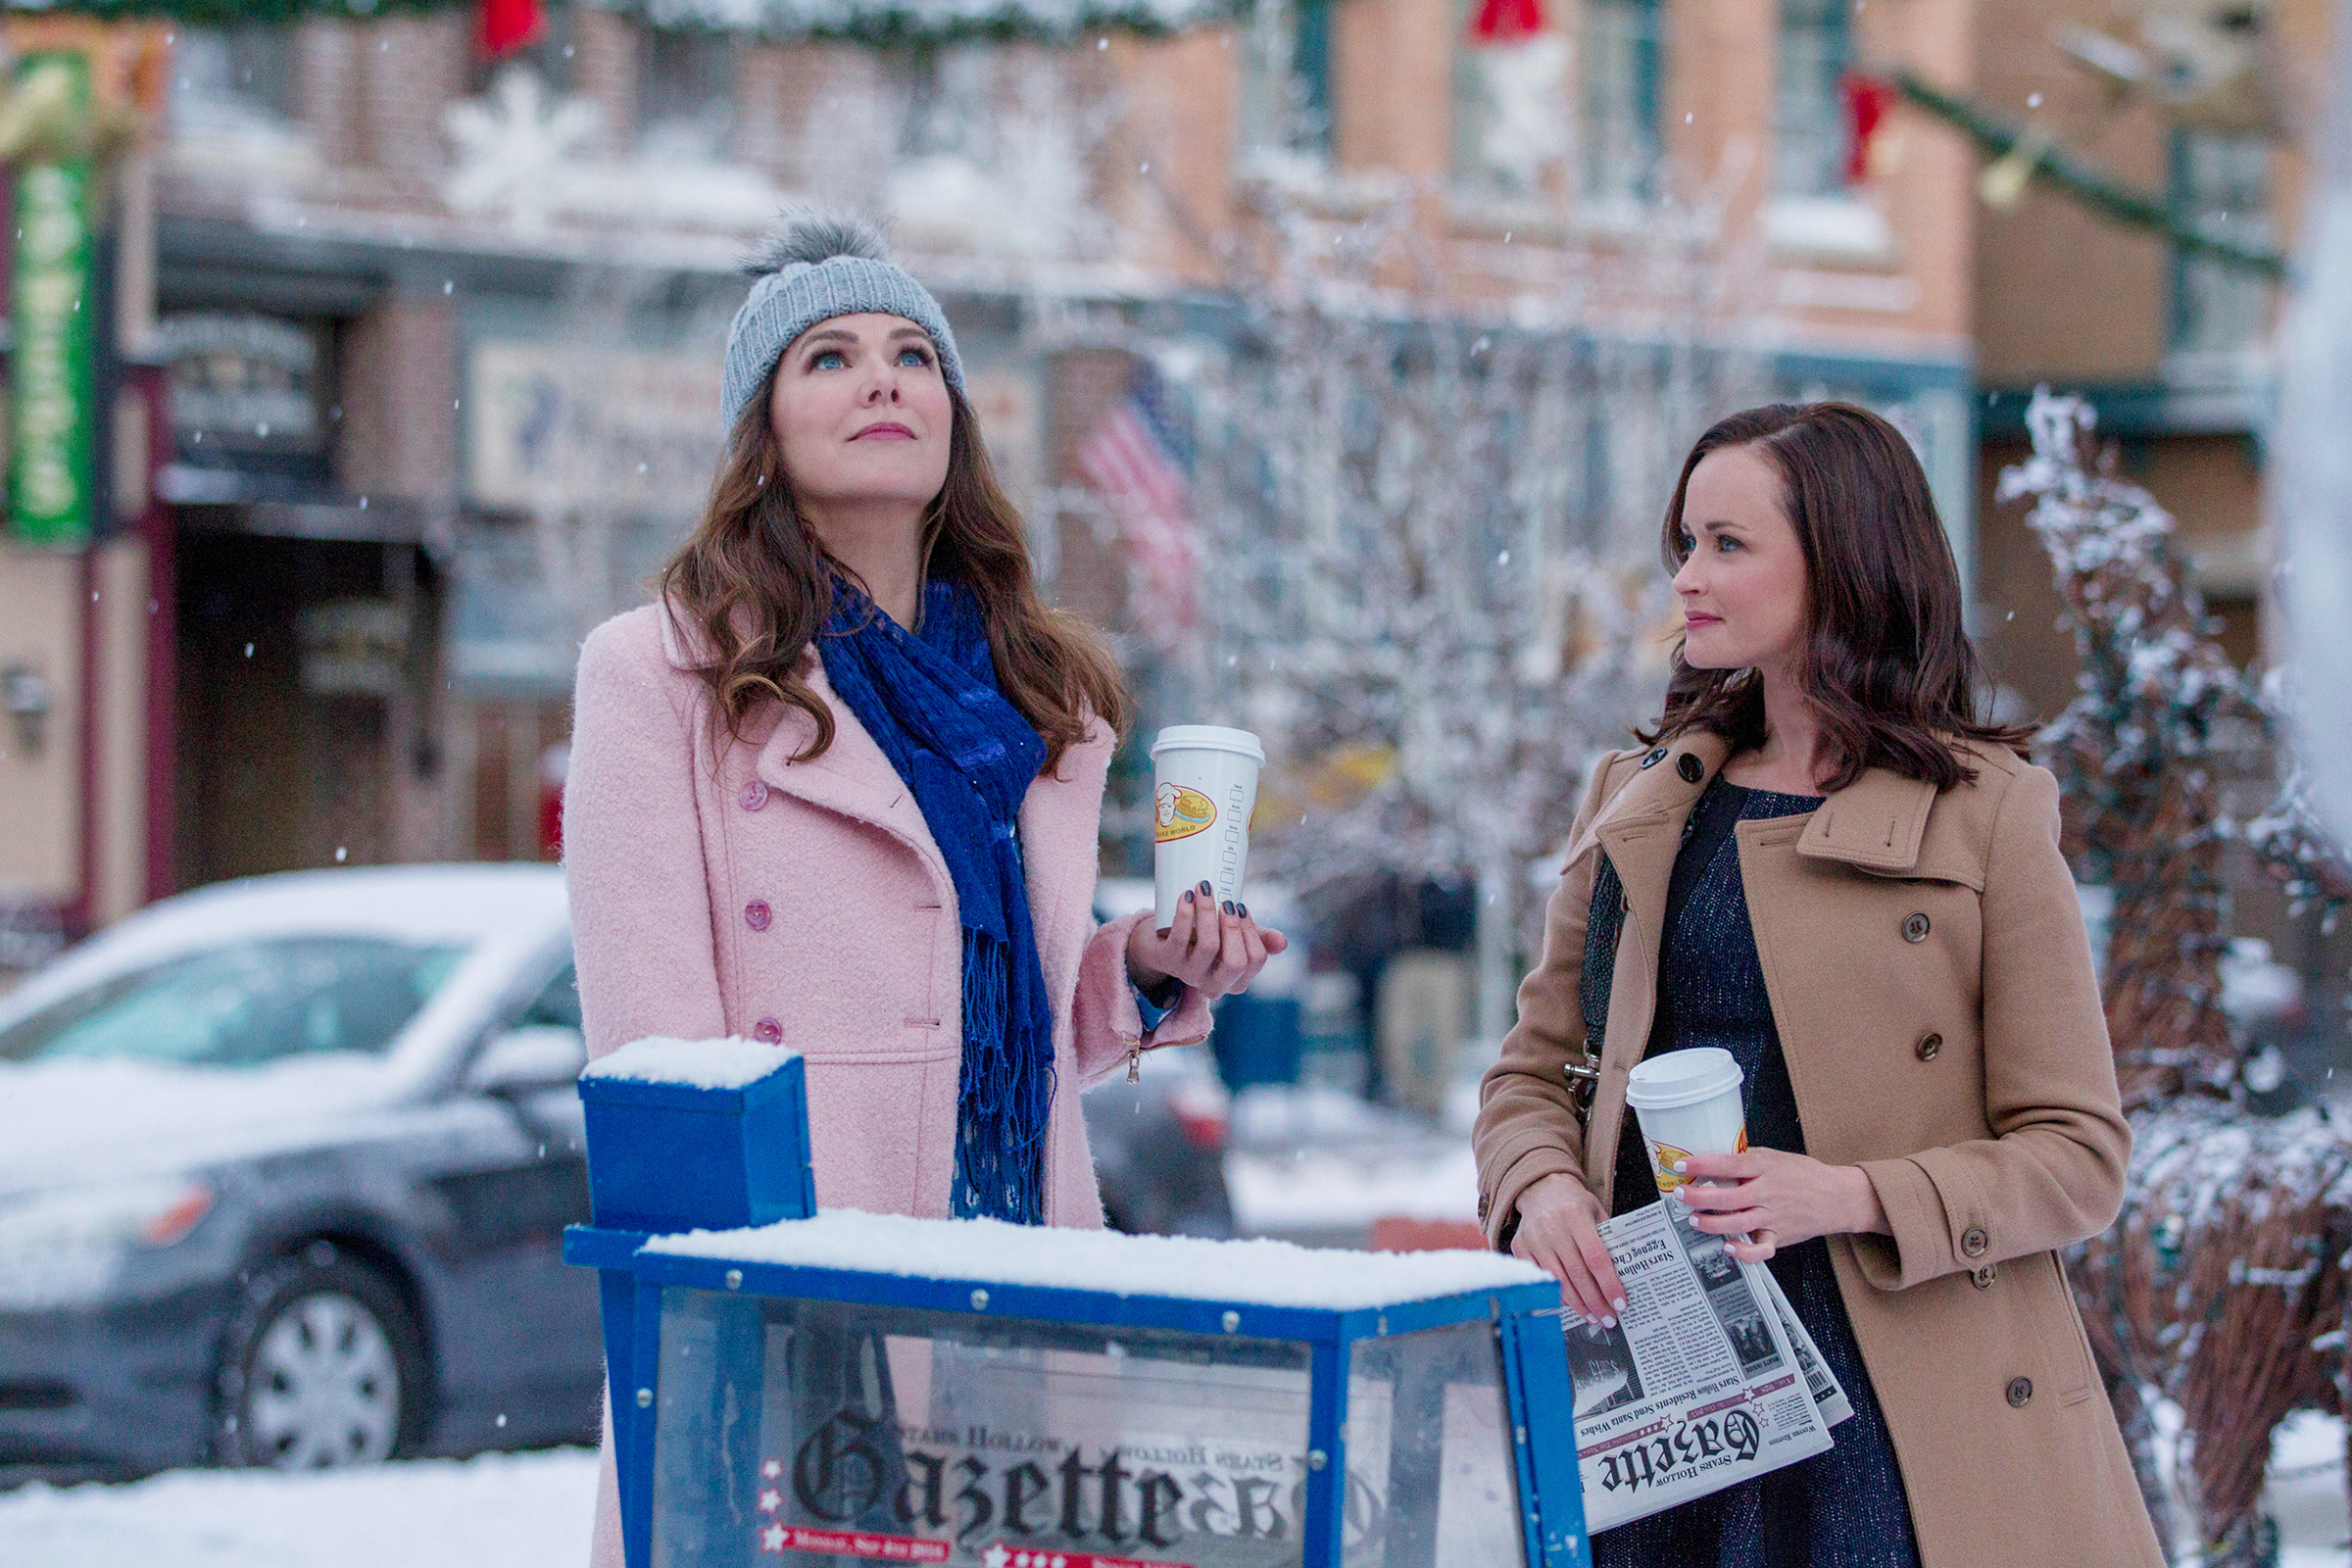 Lorelai and Rory stand outside with coffee cups, winter attire, and a snowy backdrop